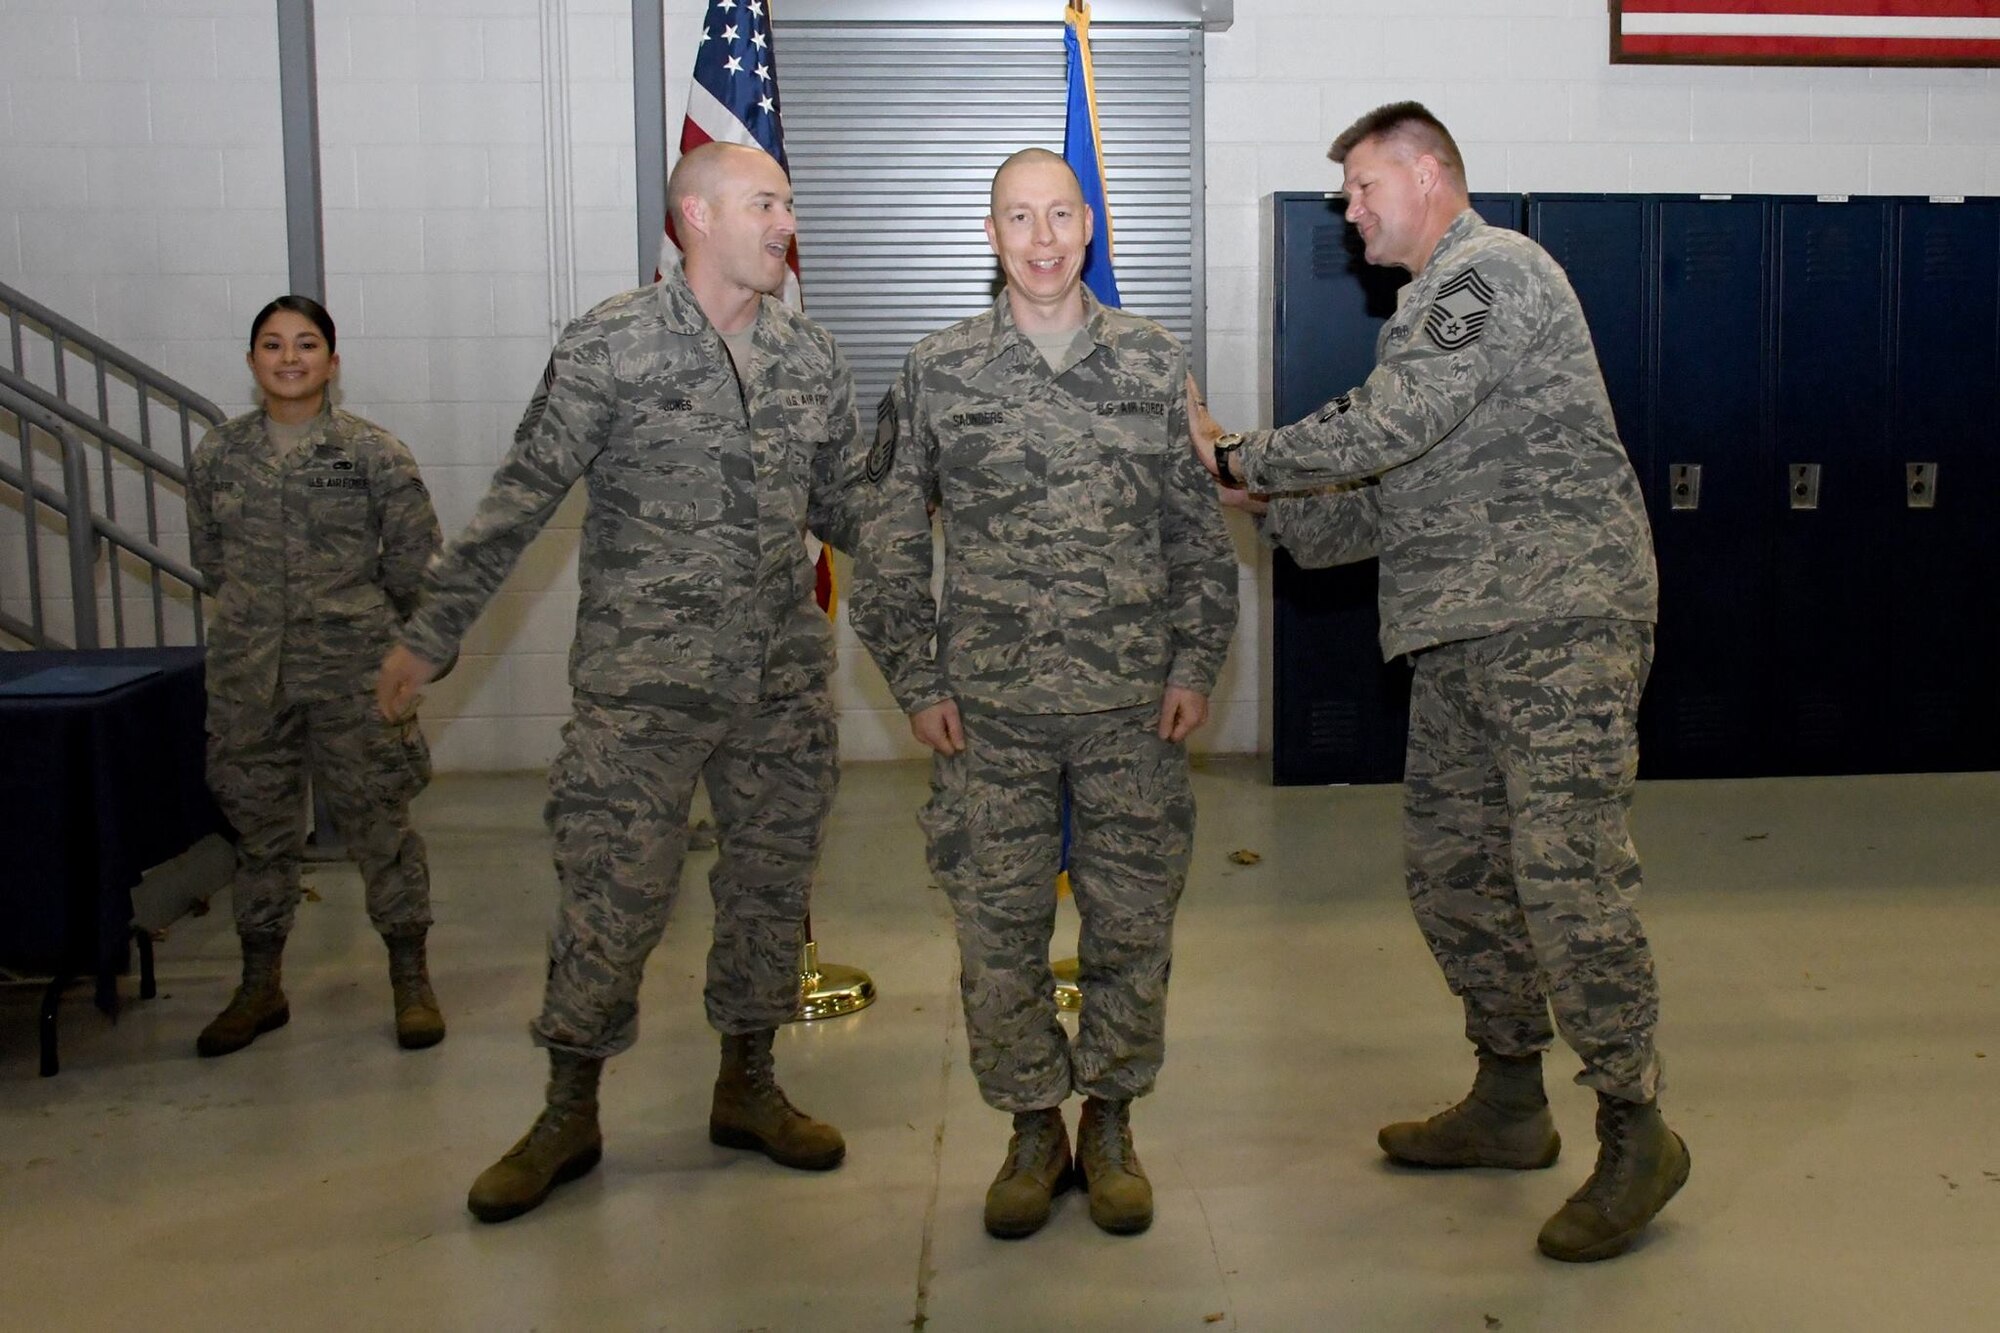 Chief Master Sgt. Glen F. Saunders Jr., quality assurance superintendent with the 94th Maintenance Group, is "patched" by Chief Master Sgt. Christopher Sokolick, maintenance superintendent with the 94th MG, and Chief Master Sgt. Marvin Jones, maintenance operations superintendent with the 94th MG, during his promotion ceremony March, 5, 2017 at Dobbins Air Reserve Base, Georgia. (U.S. Air Force photo/Airman 1st Class Justin Clayvon)